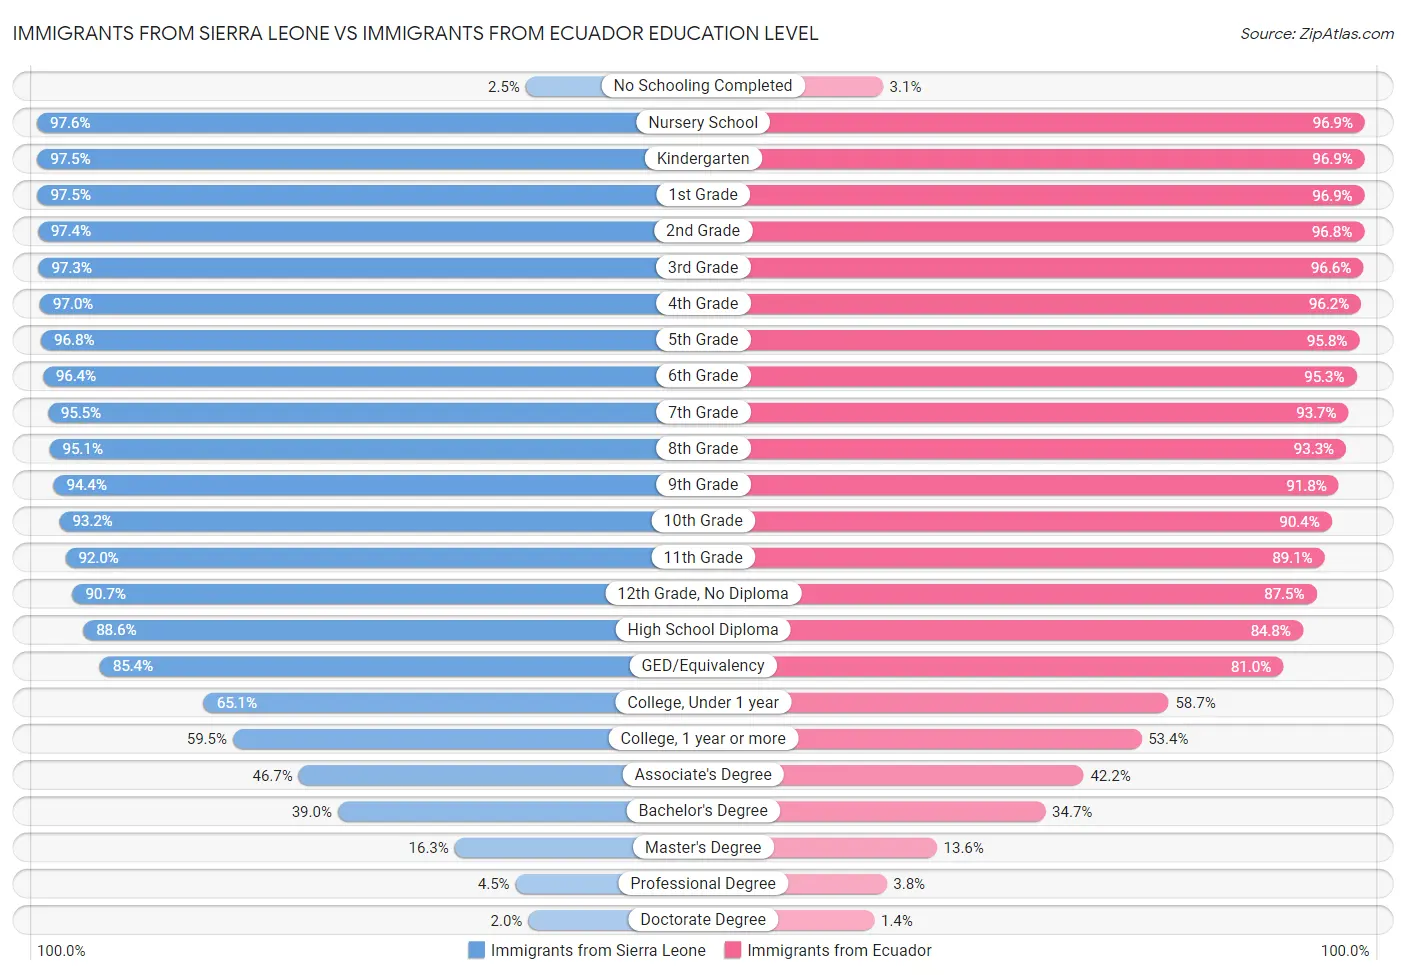 Immigrants from Sierra Leone vs Immigrants from Ecuador Education Level